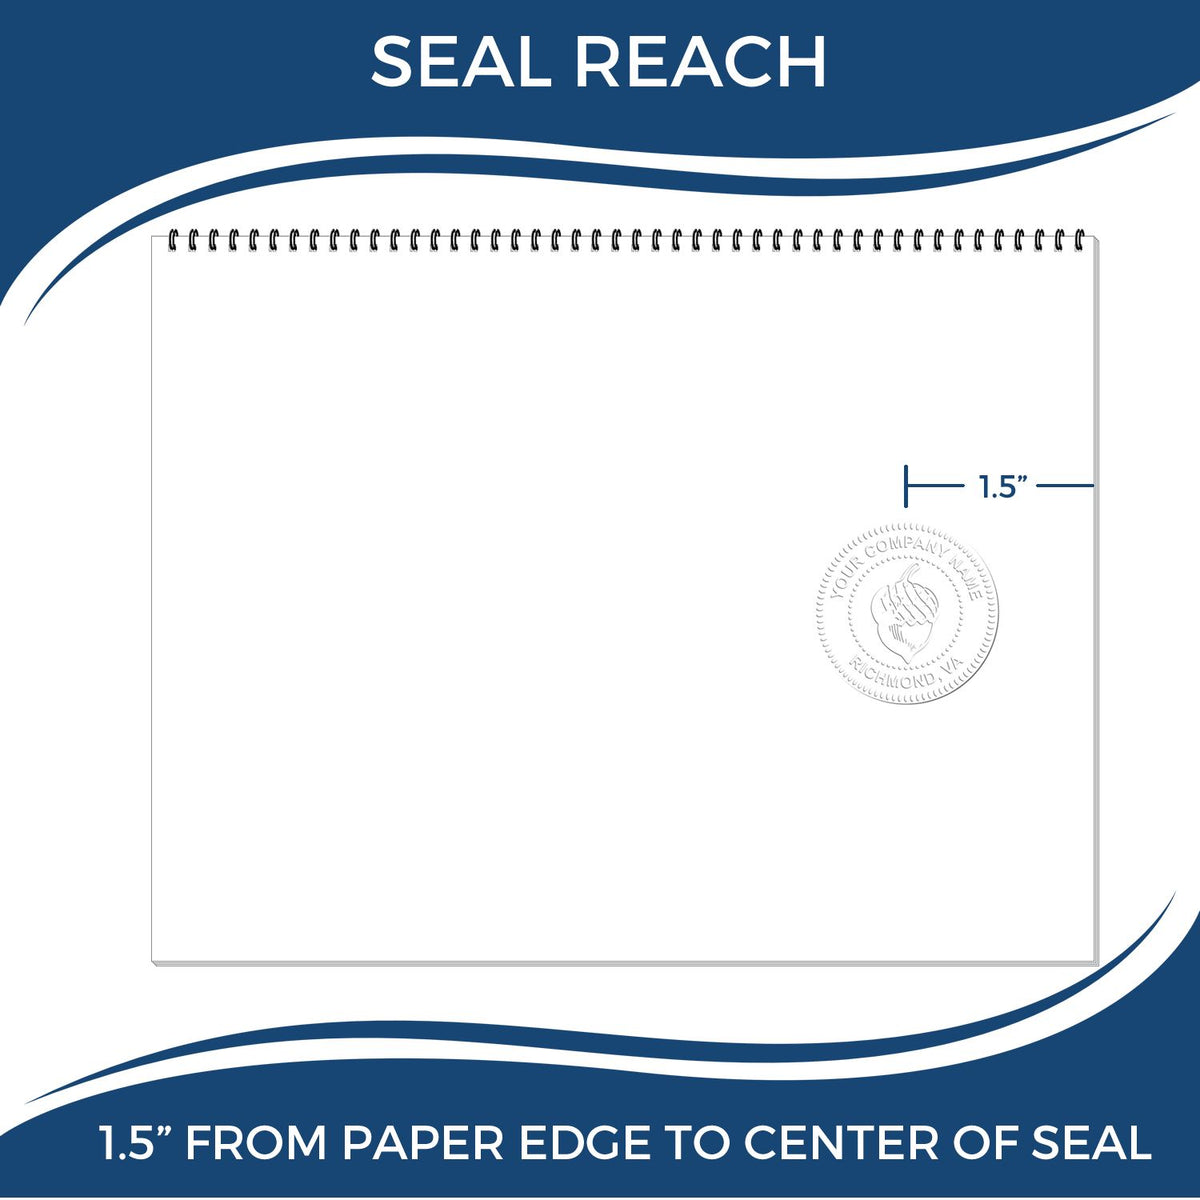 An infographic showing the seal reach which is represented by a ruler and a miniature seal image of the Handheld Massachusetts Professional Geologist Embosser